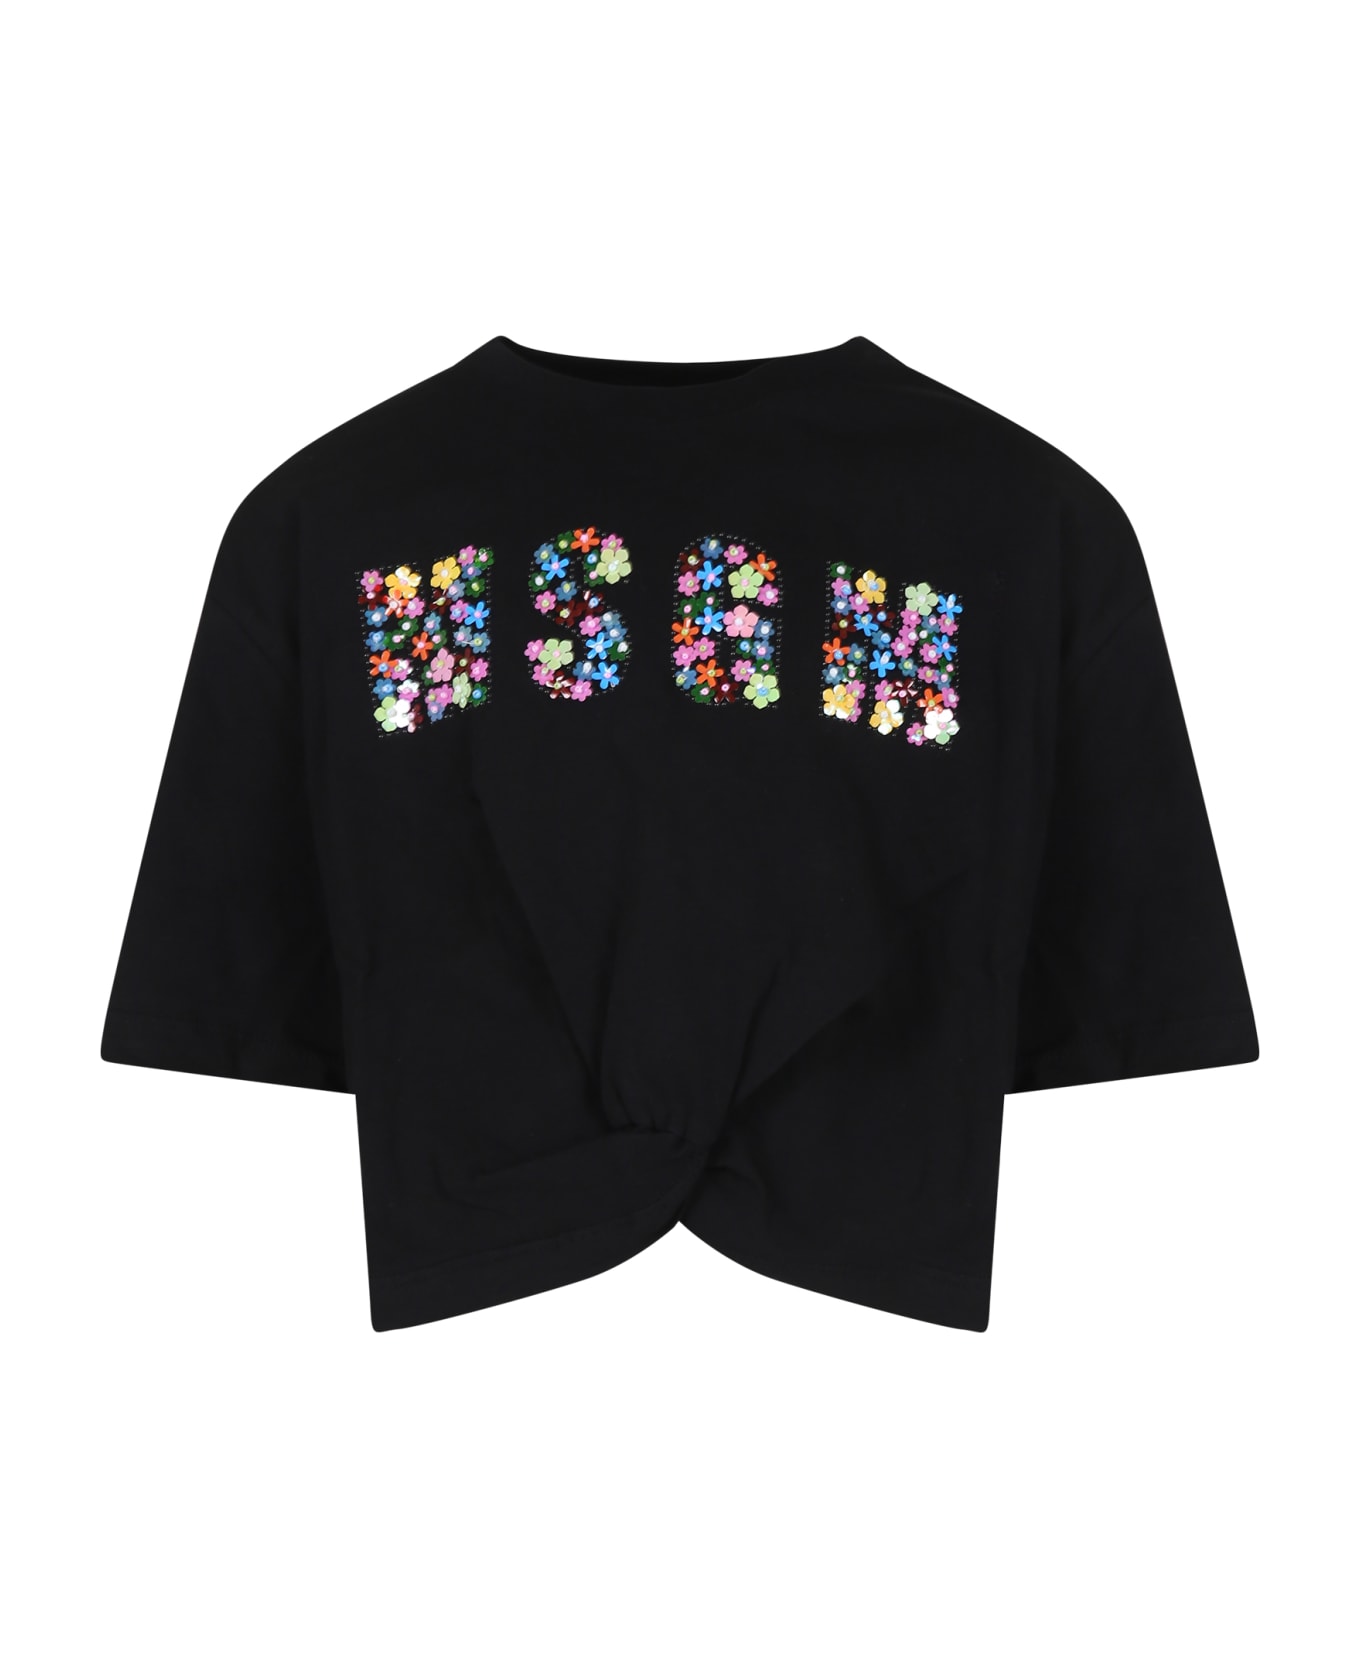 MSGM Black Crop T-shirt For Girl With Logo And Beads - Black